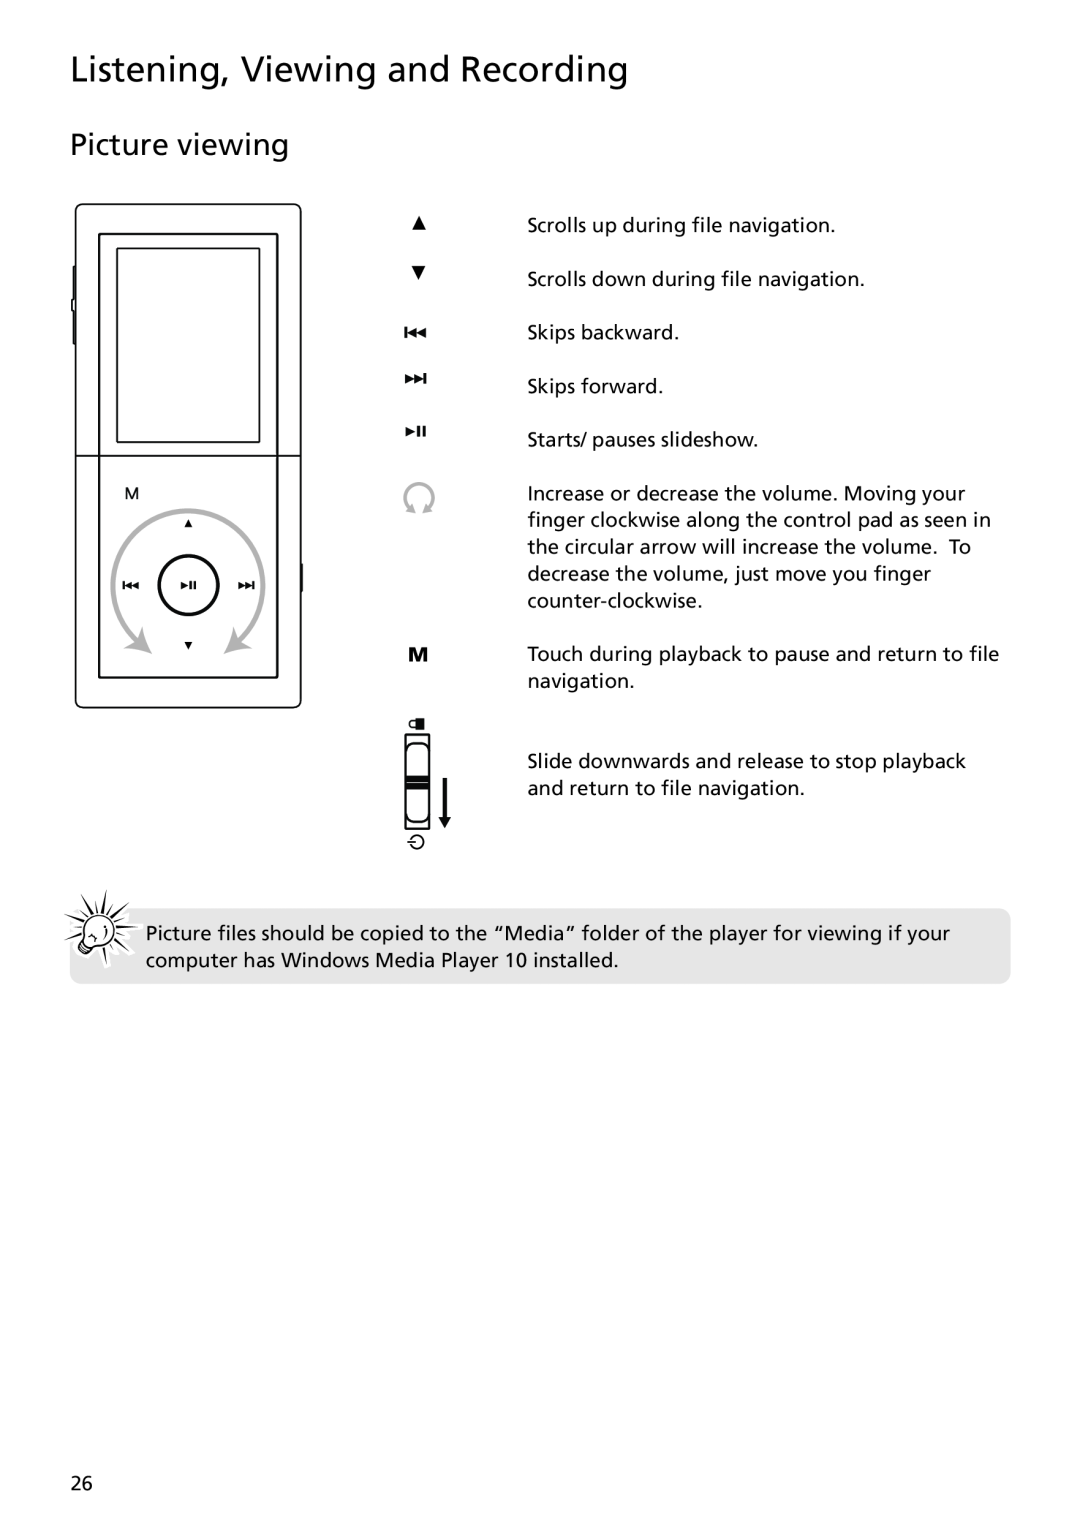 RCA MC5104 user manual Picture viewing, Listening, Viewing and Recording 